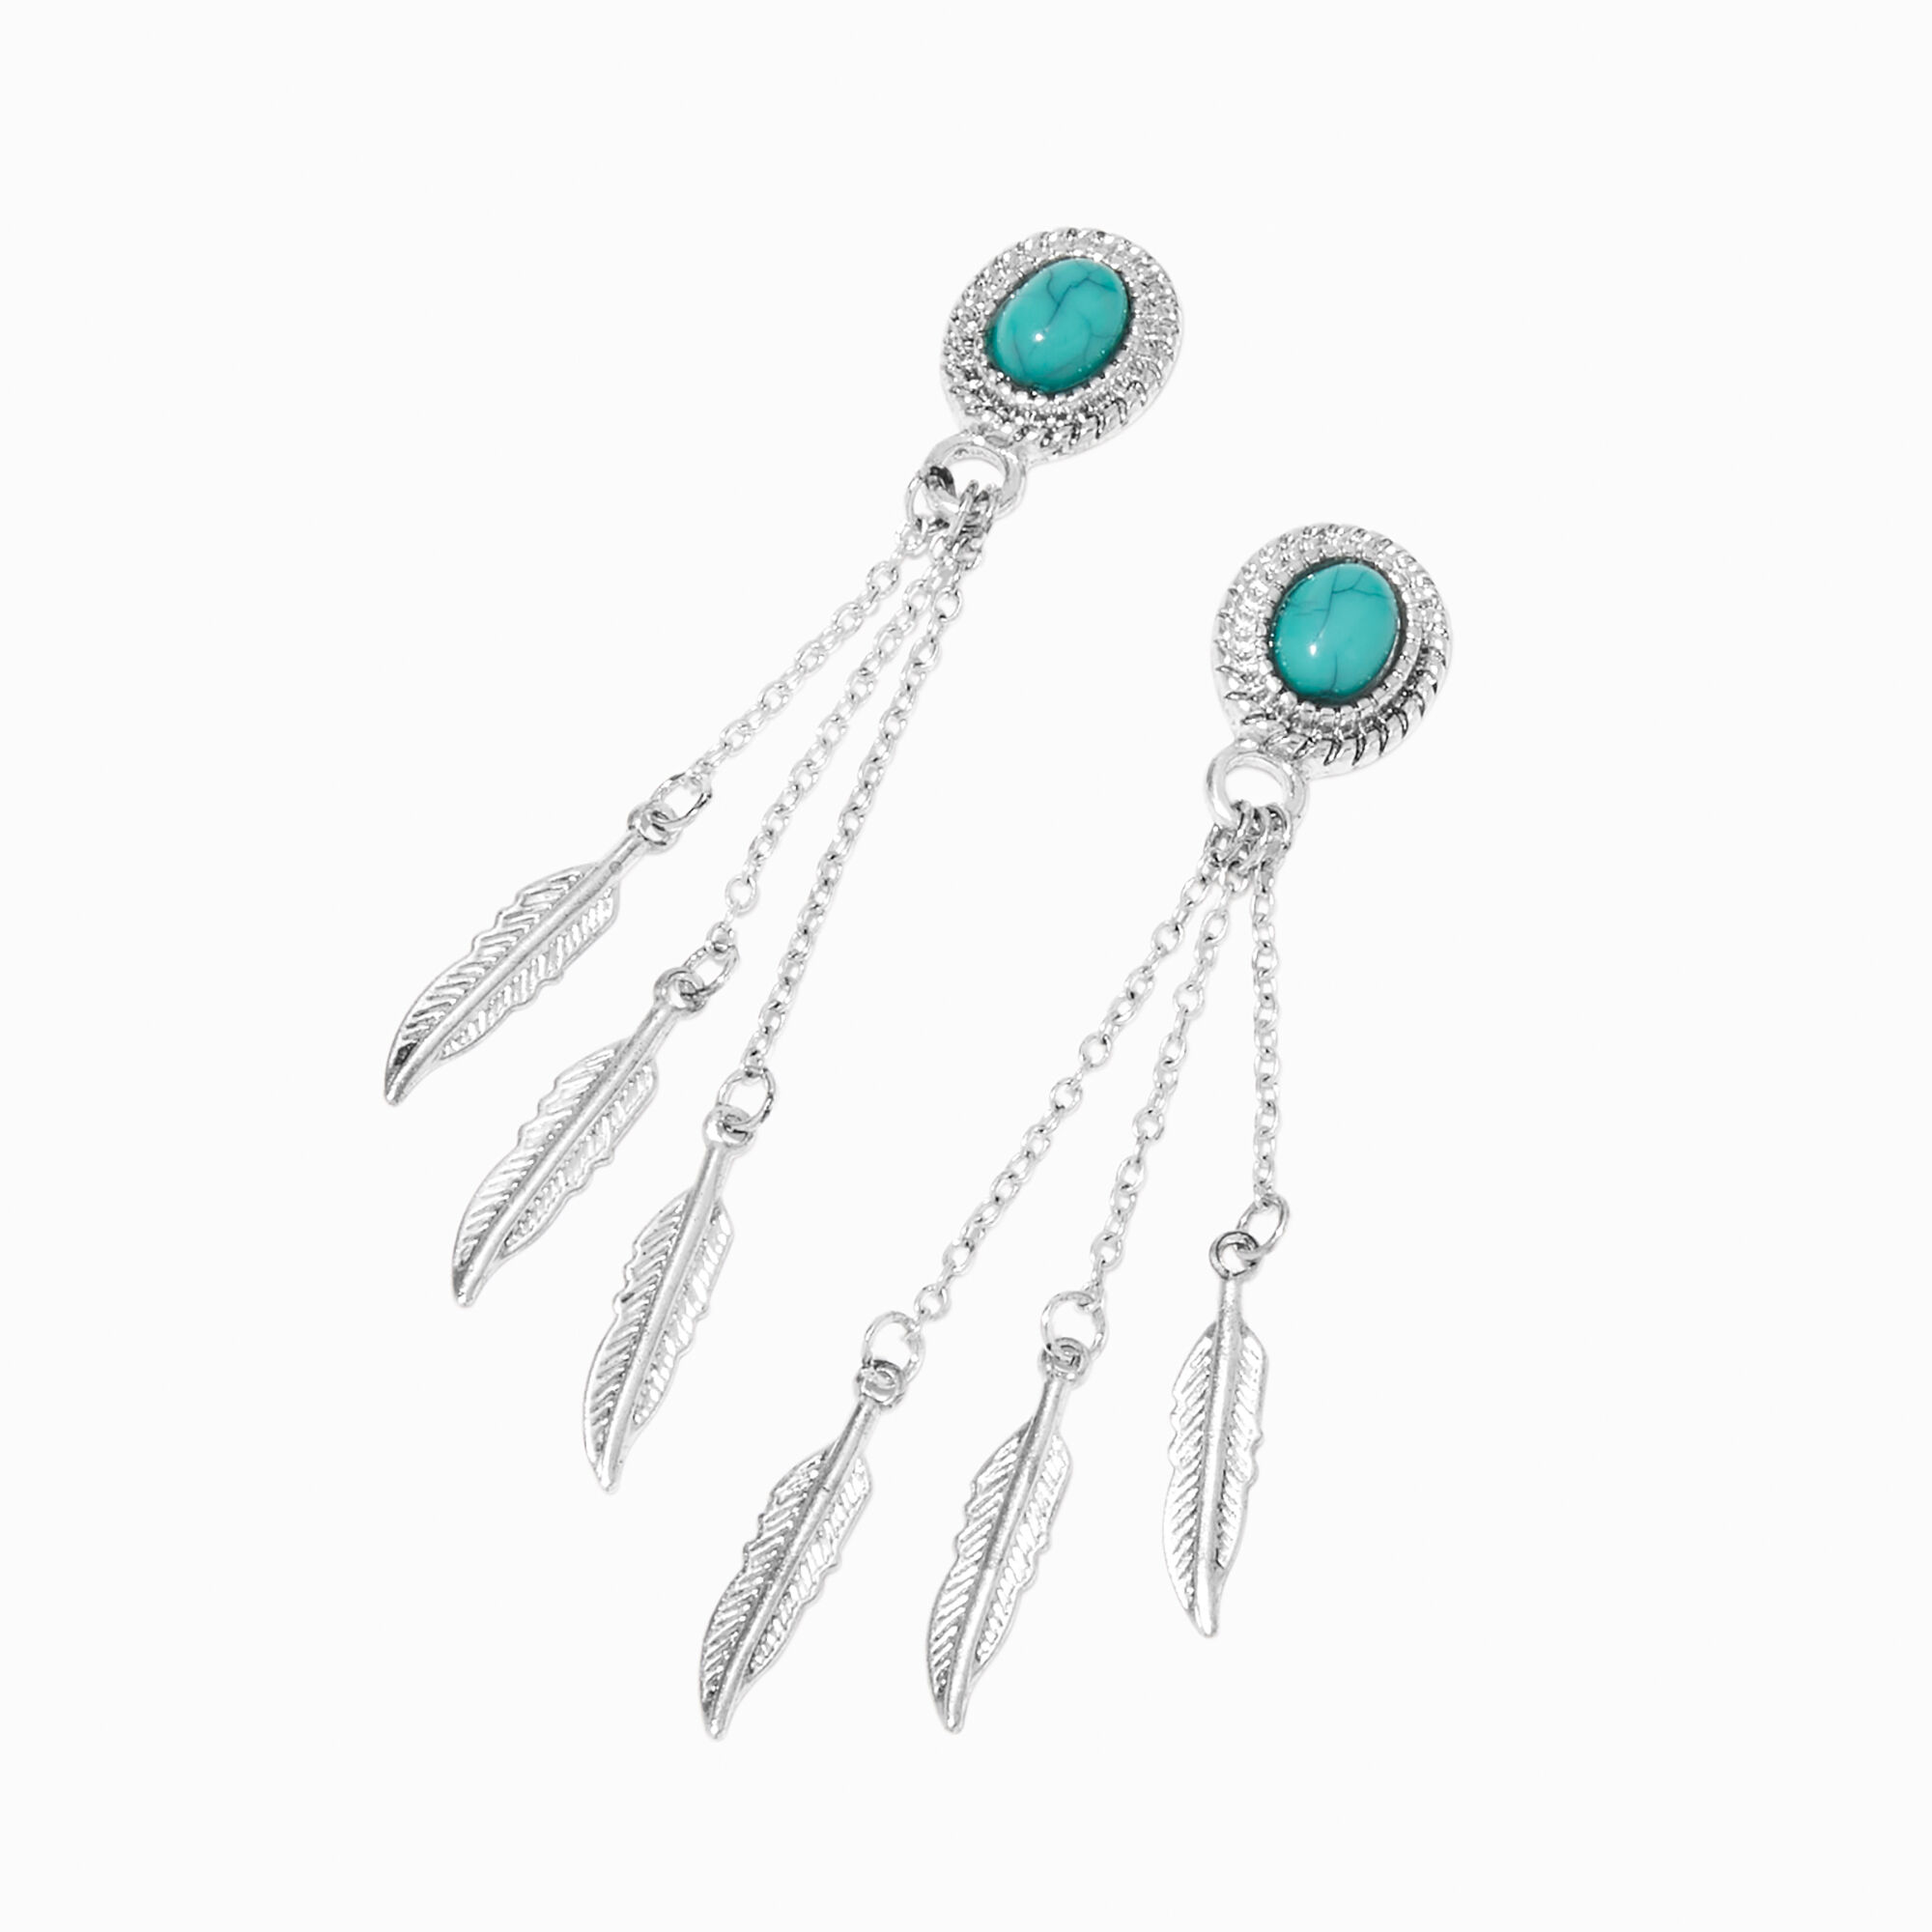 View Claires SilverTone Feather 25 Drop Earrings Turquoise information